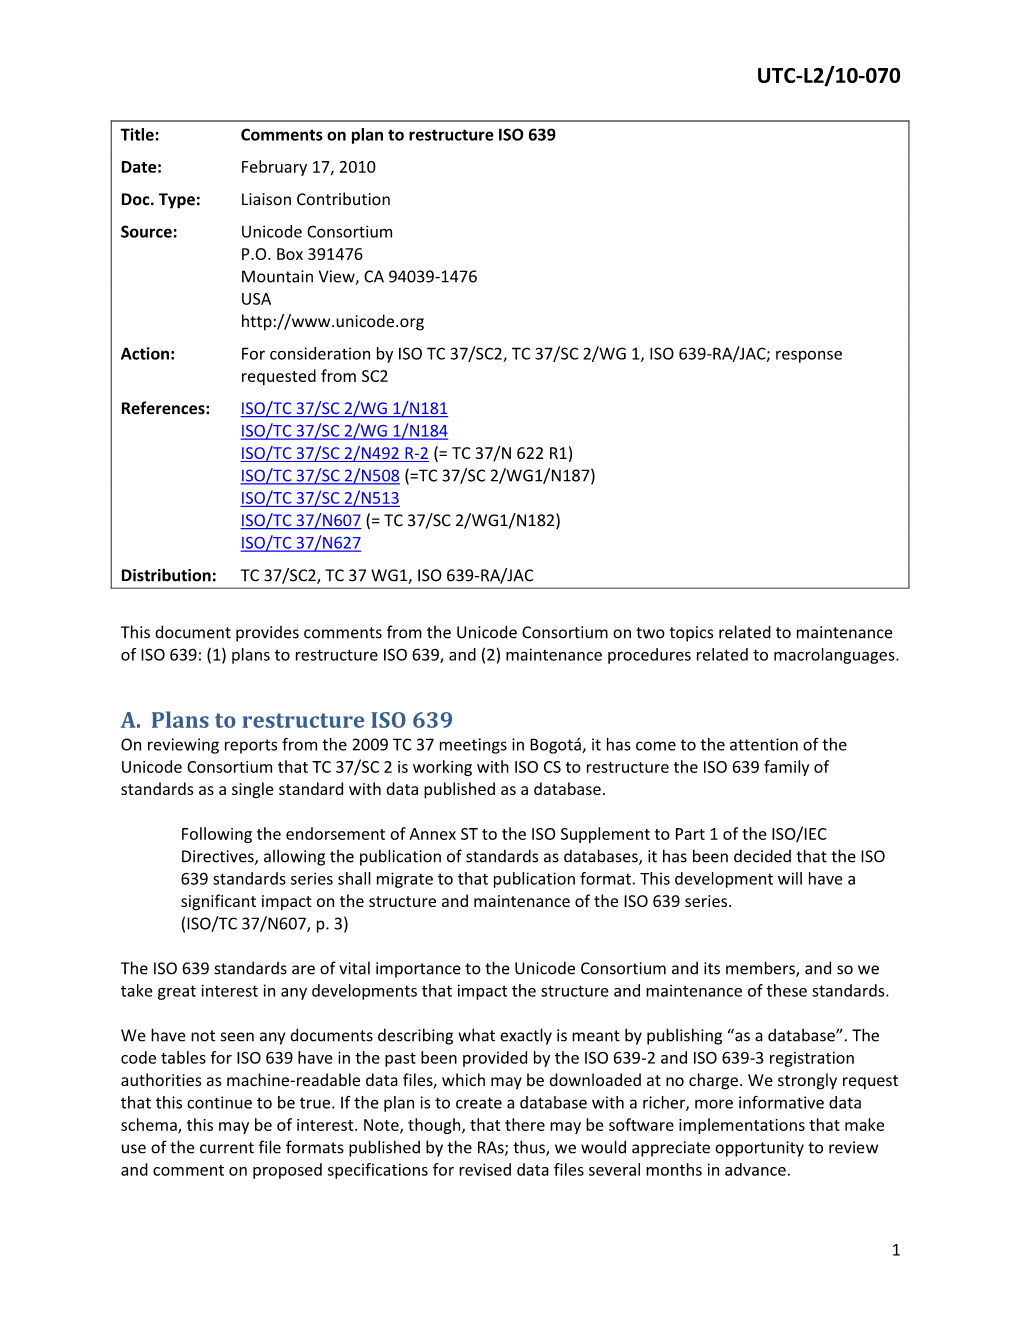 UTC-L2/10-070 A. Plans to Restructure ISO